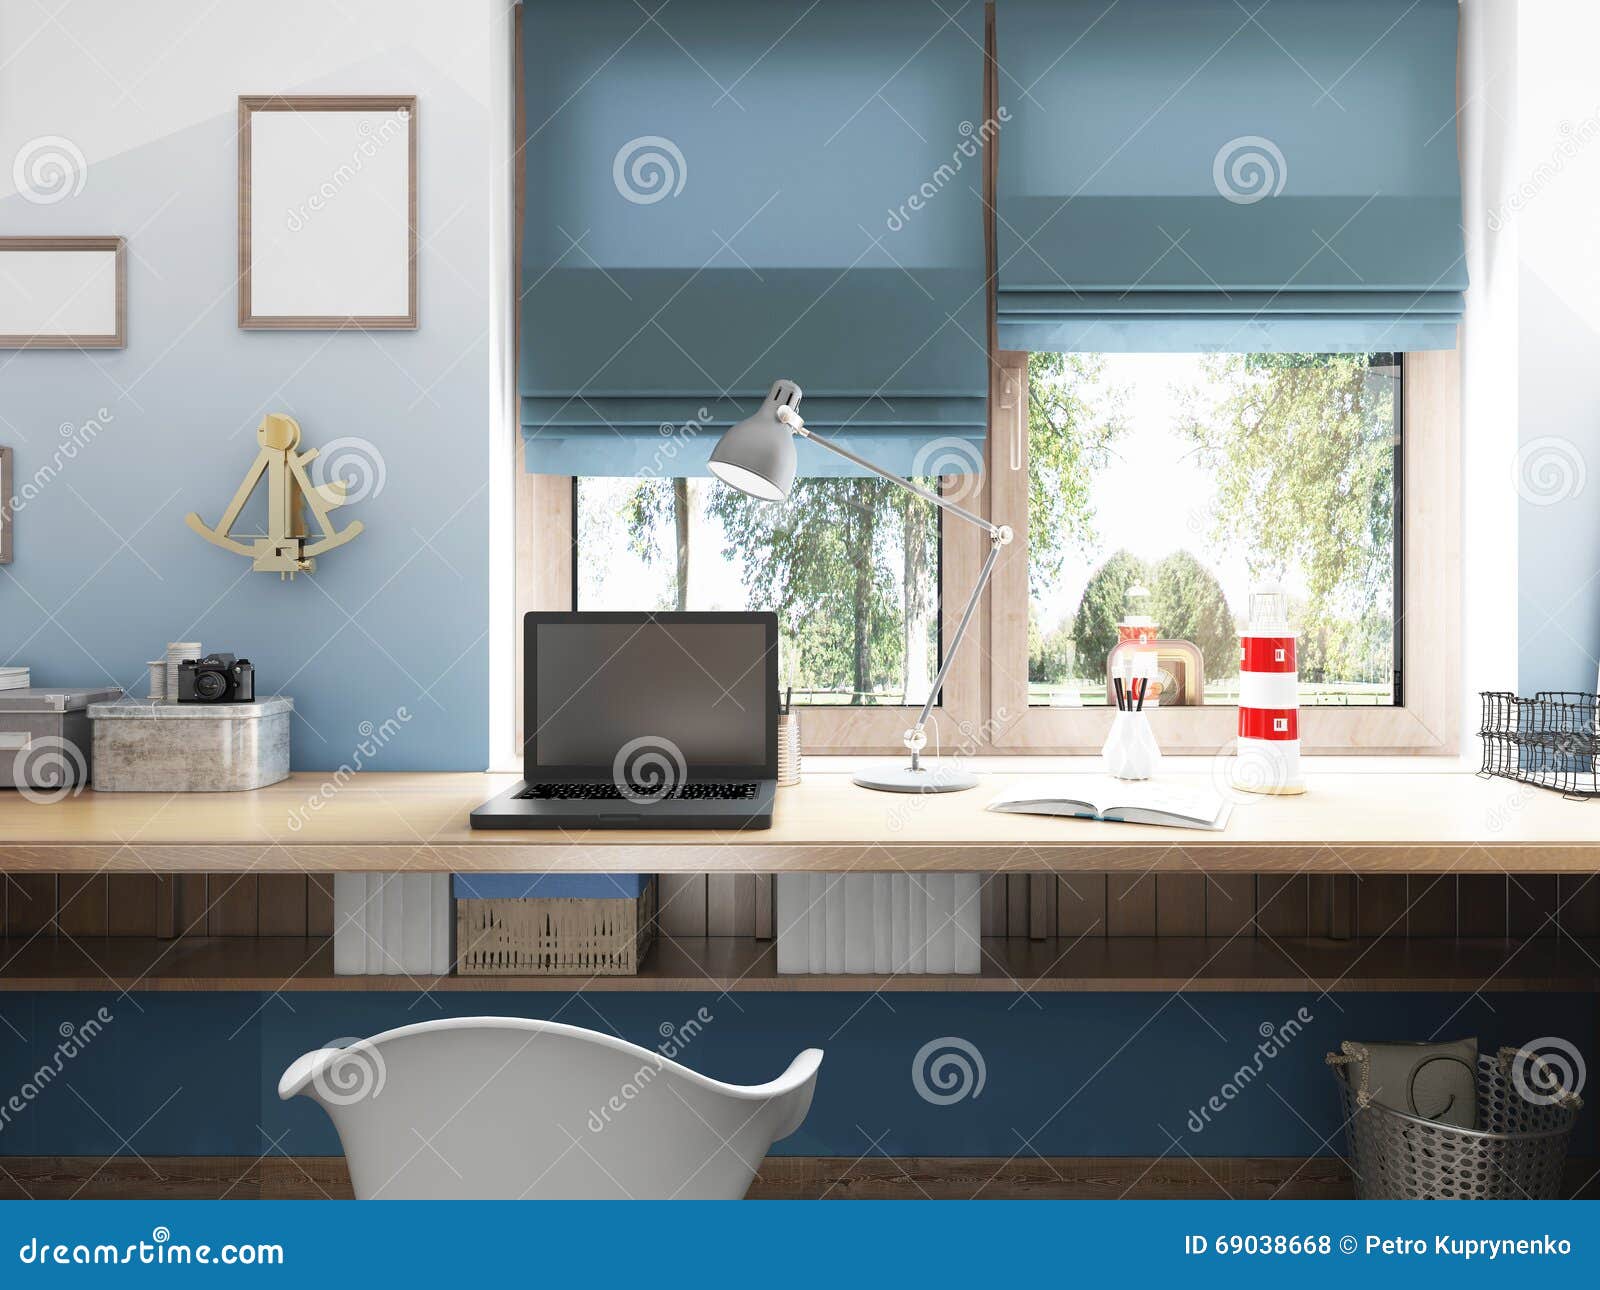 front view of the desktop to the laptop and nautical dÃÂ©cor with